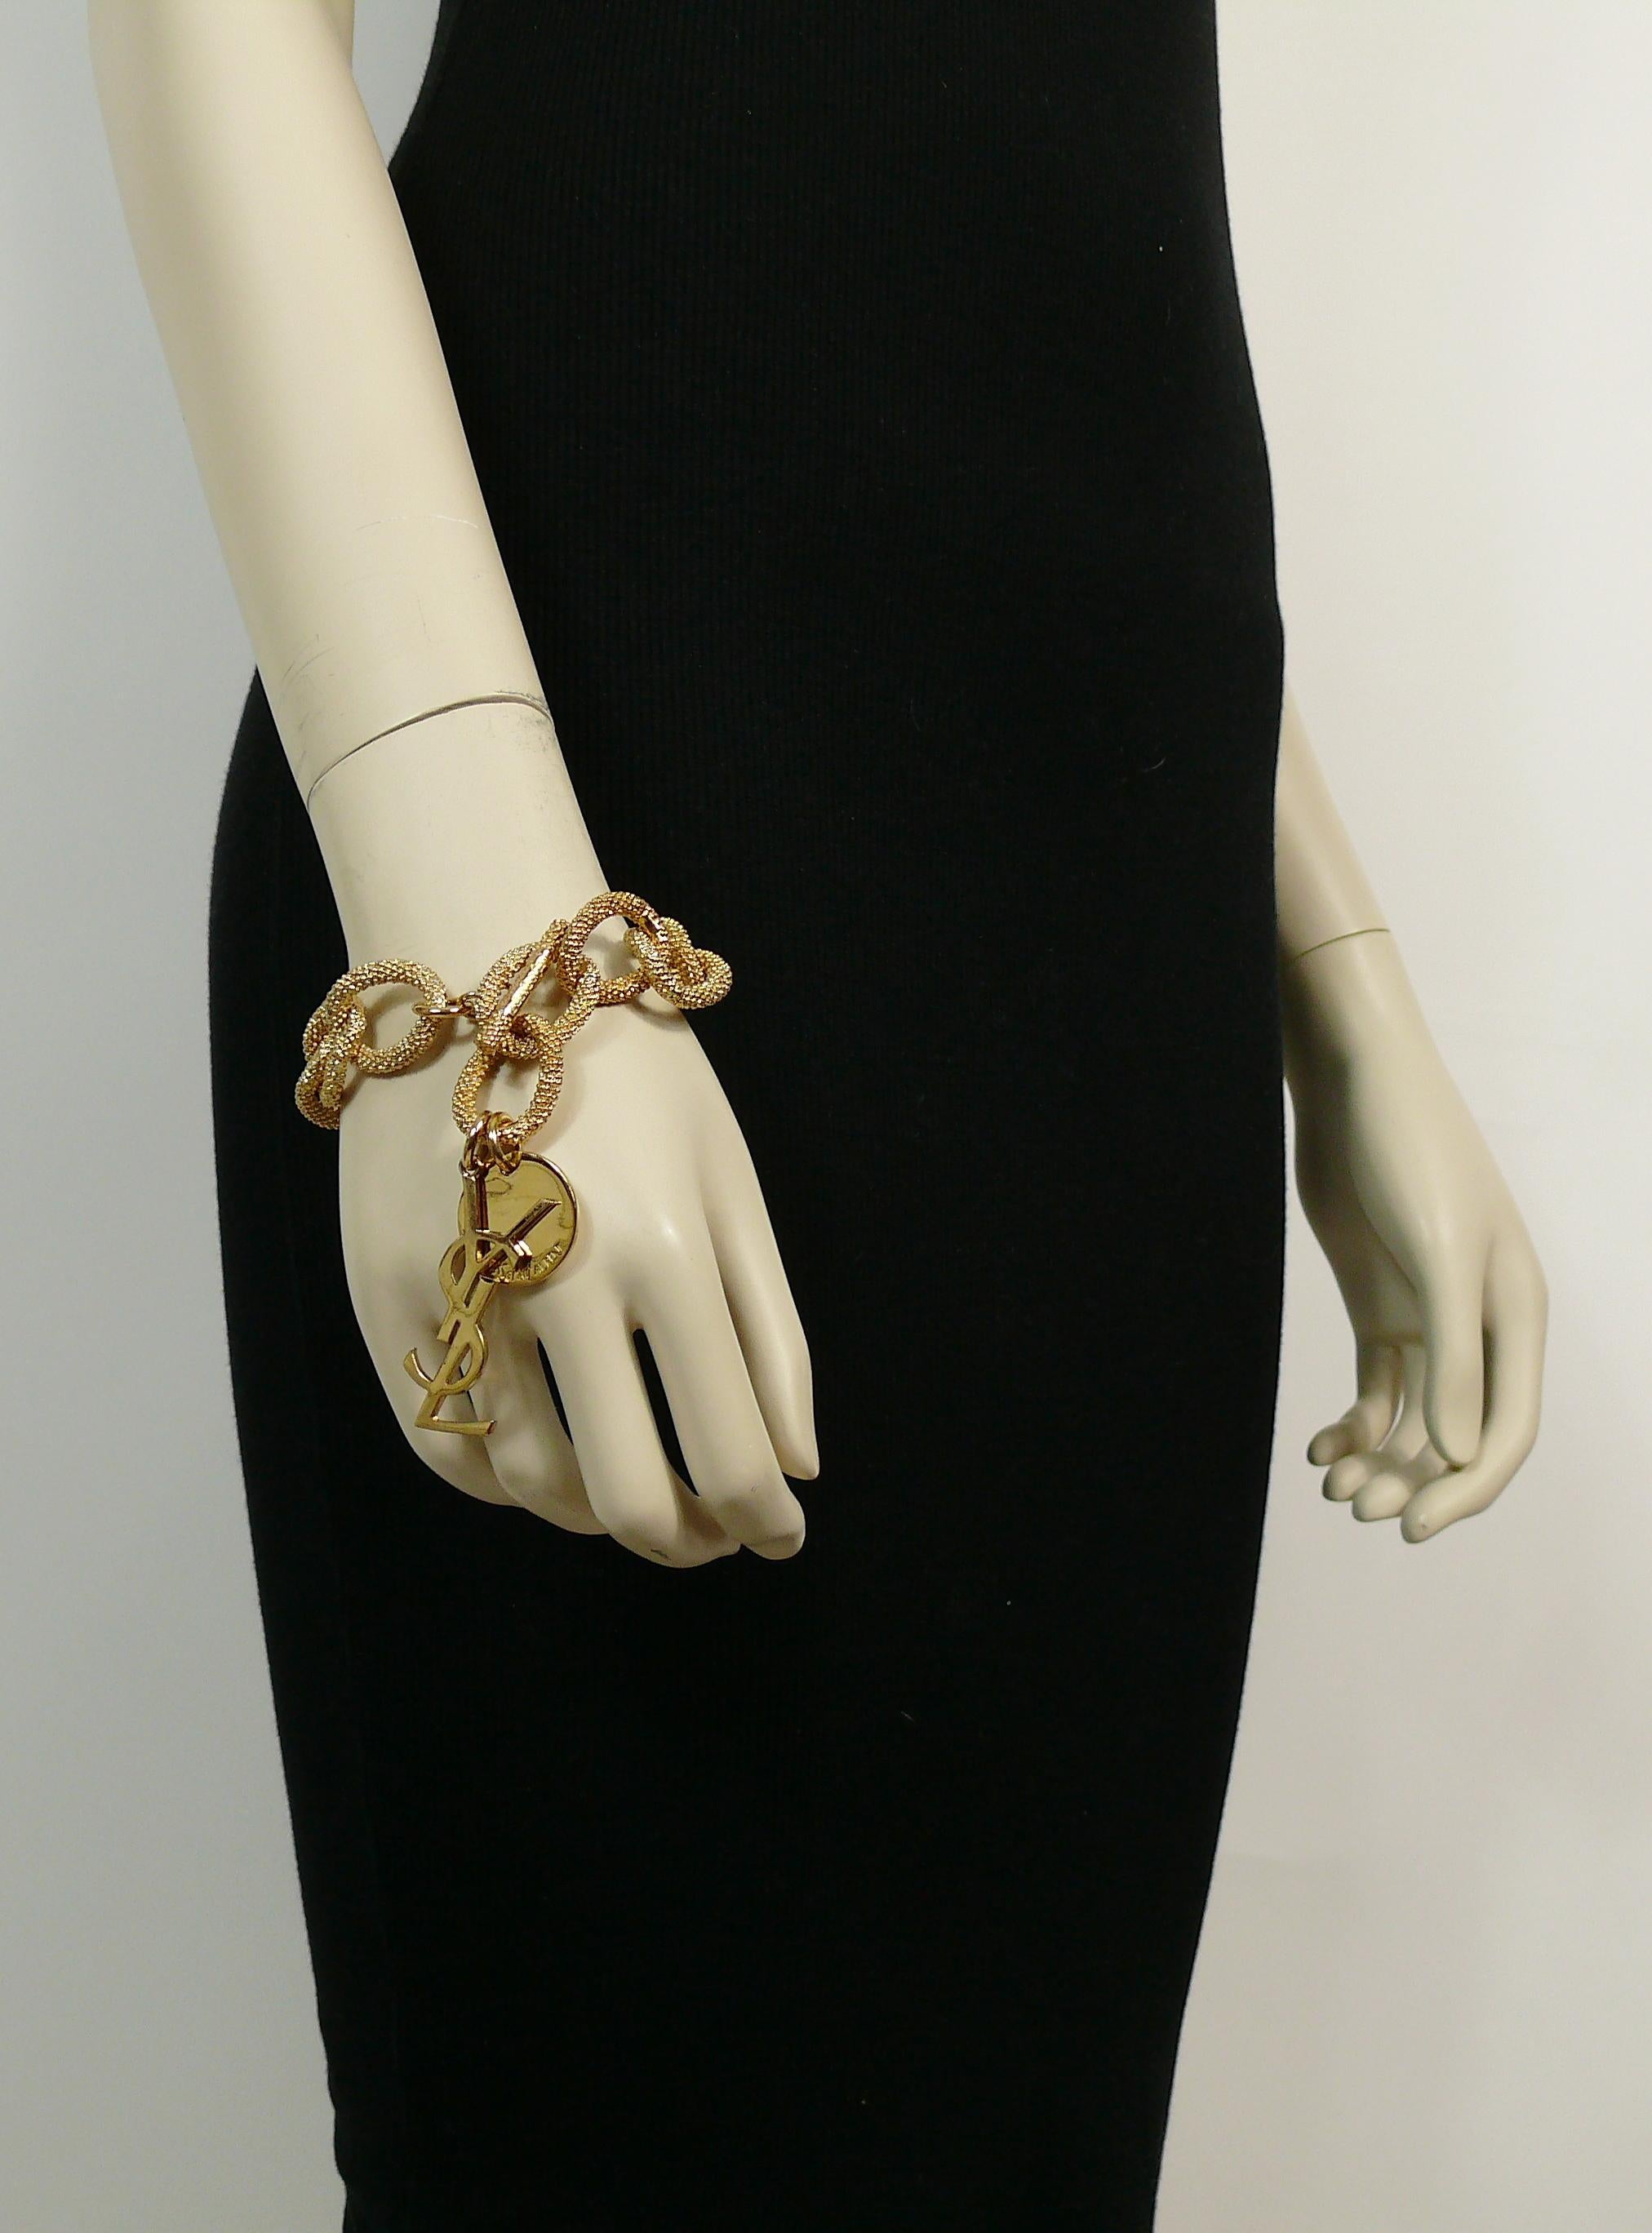 YVES SAINT LAURENT gold toned chain bracelet featuring large textured oval links, YSL logo and coin charm embossed YVES SAINT LAURENT.

T-bar closure.
Adjustable length.

Embossed YVES SAINT LAURENT on the T-bar and coin charm.

Indicative